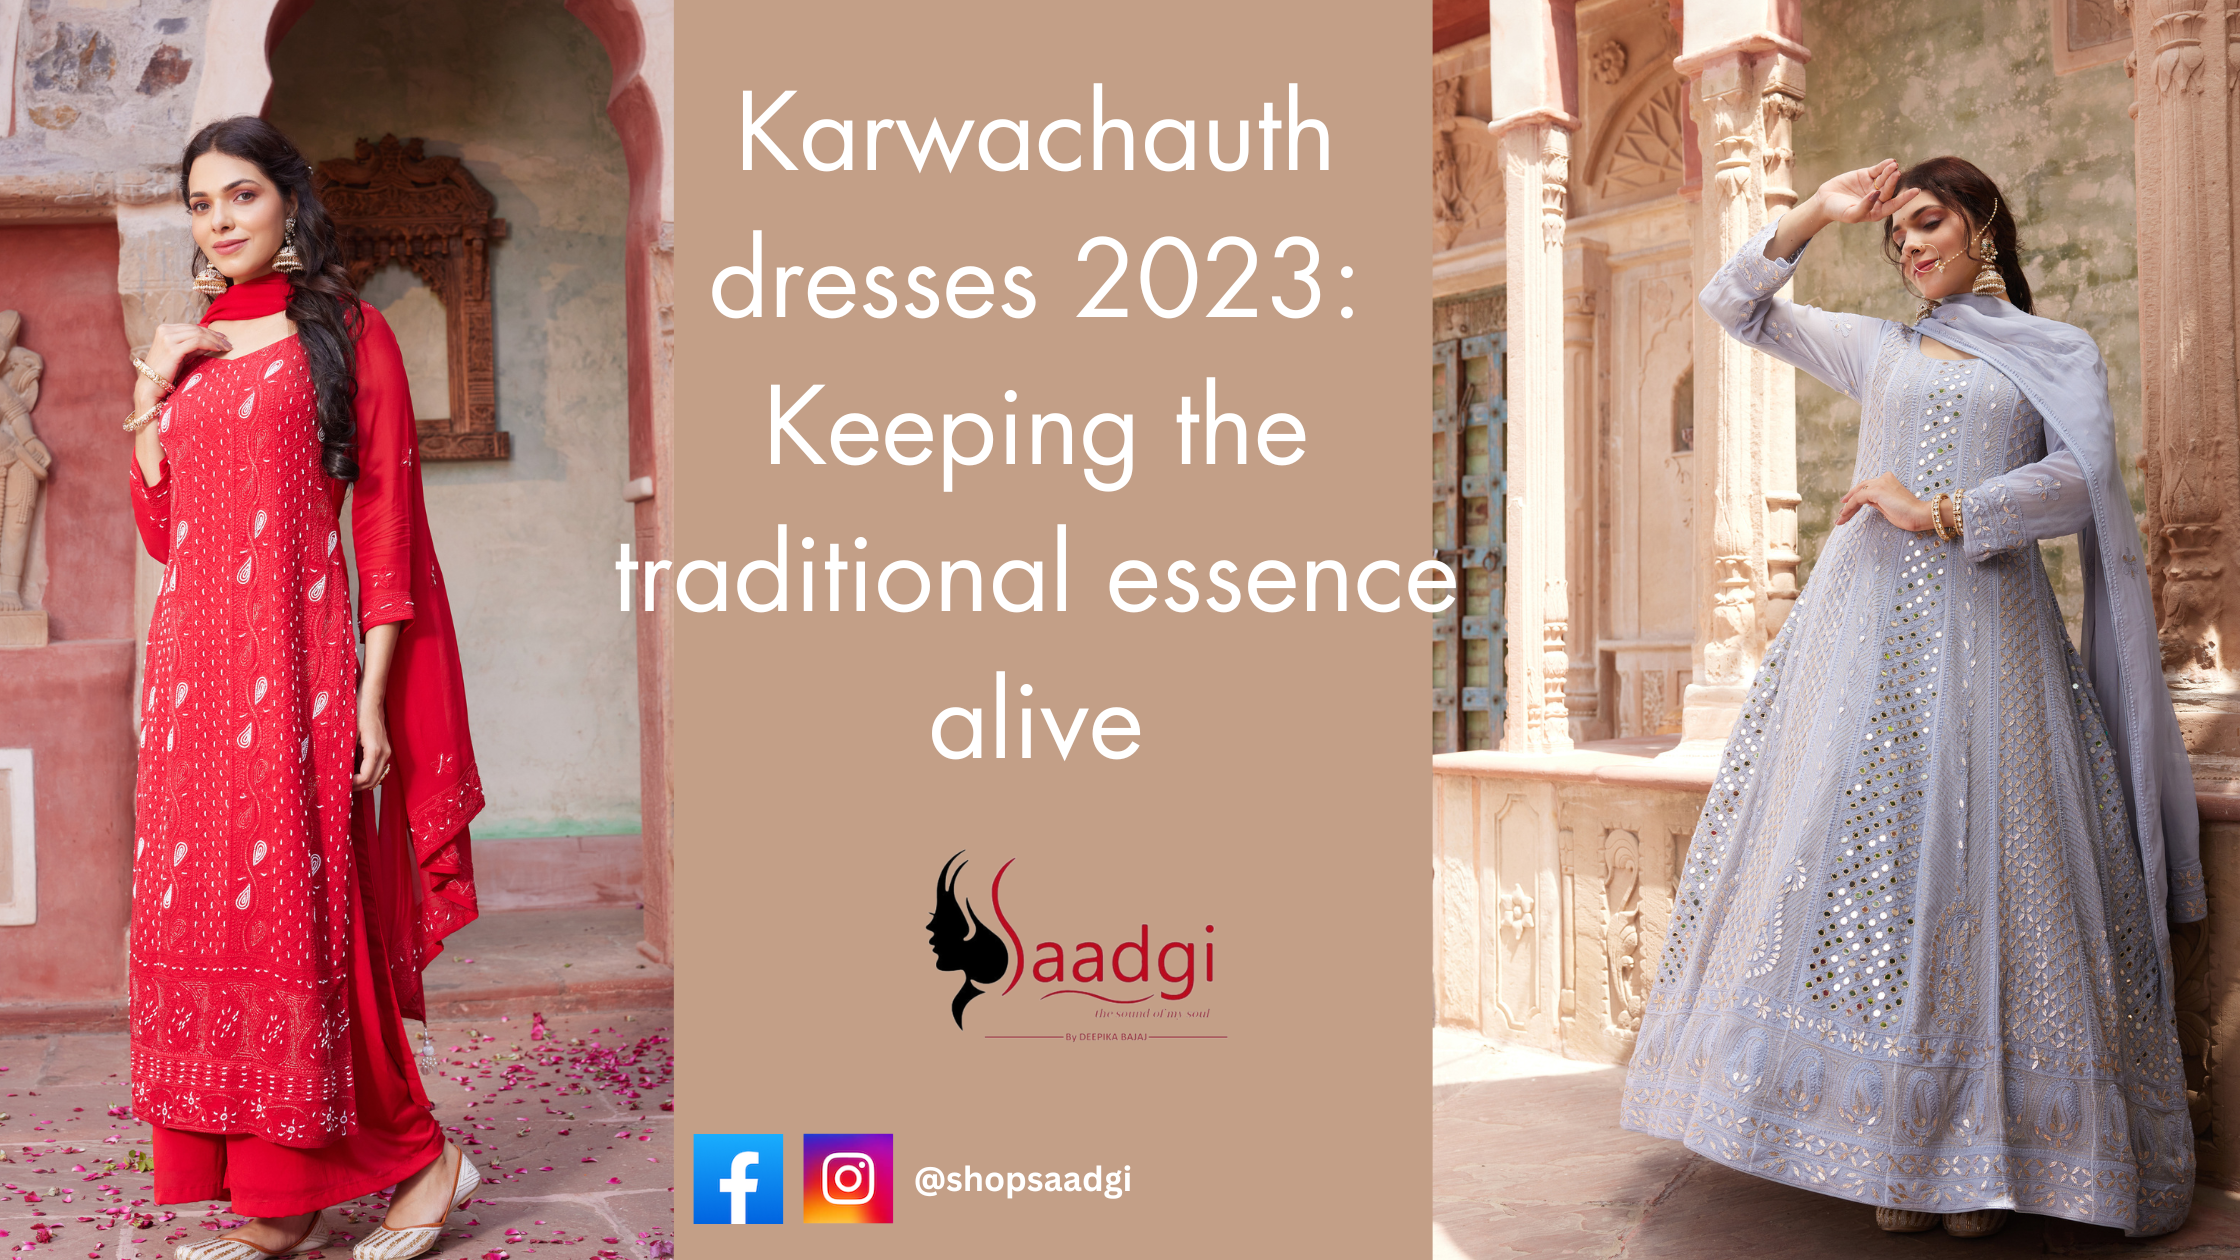 Karwachauth dresses 2023: Keeping the traditional essence alive